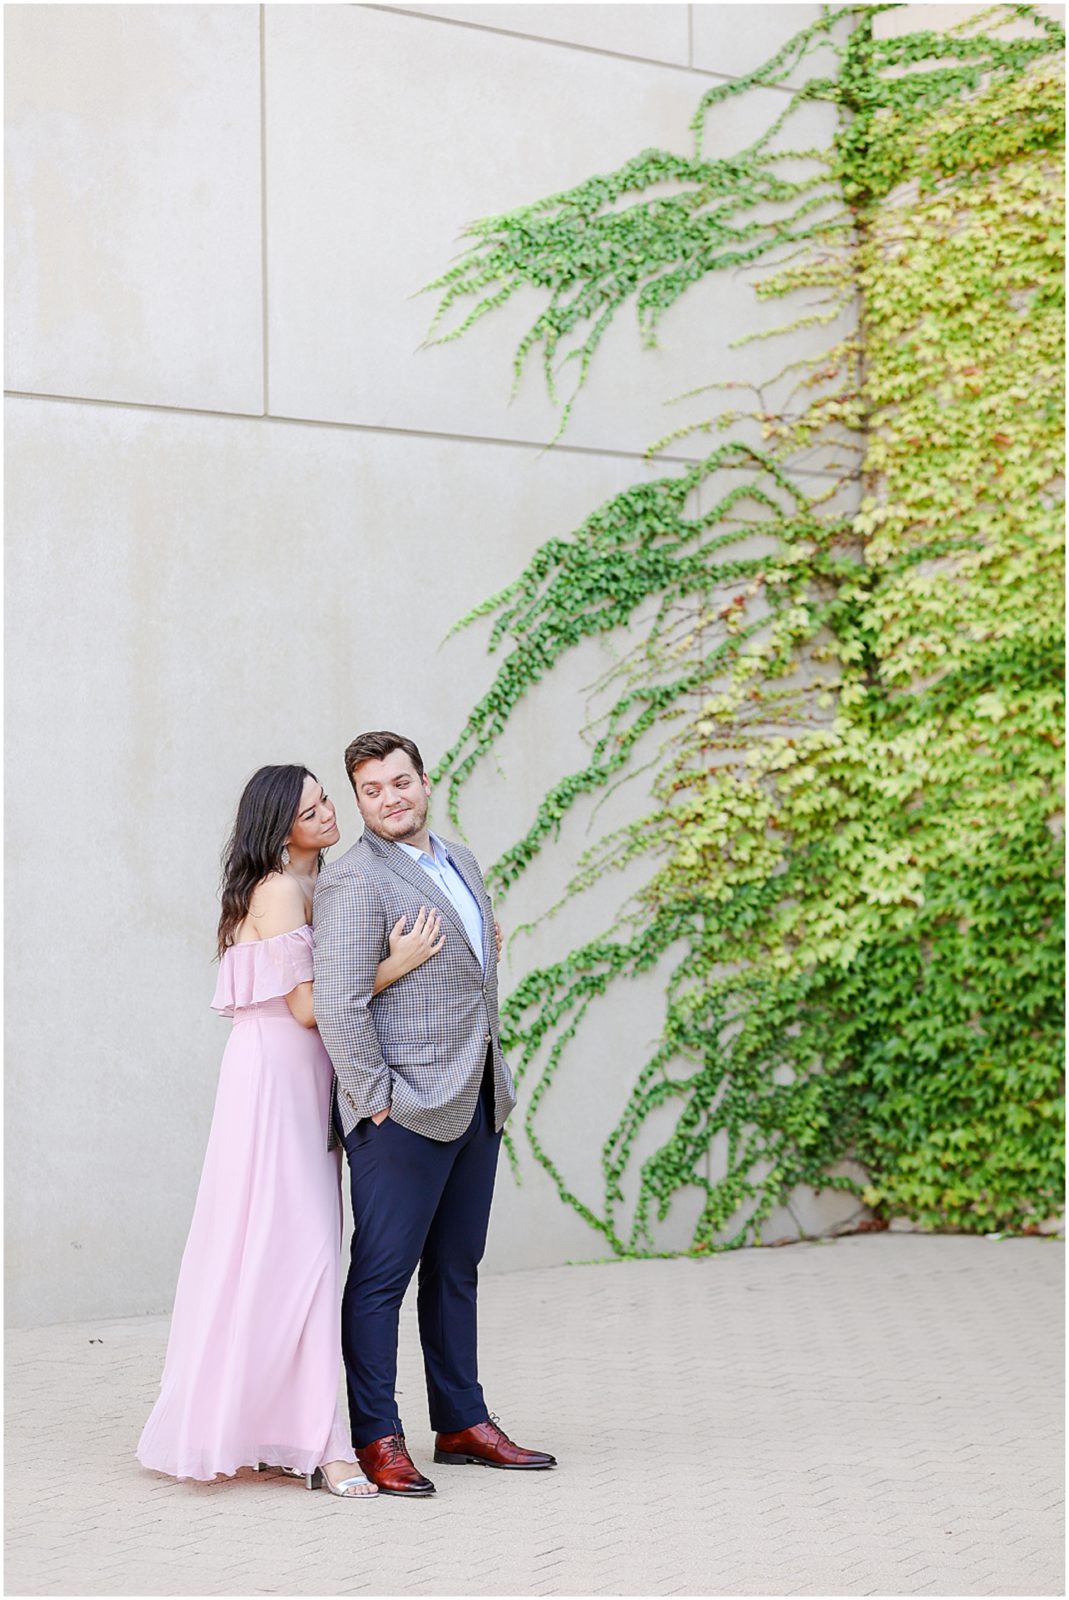 gorgeous engagement photo ideas - Kansas City Kauffman Center Engagement Photos - Kansas City Wedding Photographer - Mariam Saifan Photography - Engagement Session Ideas on what to wear and where to take your photos